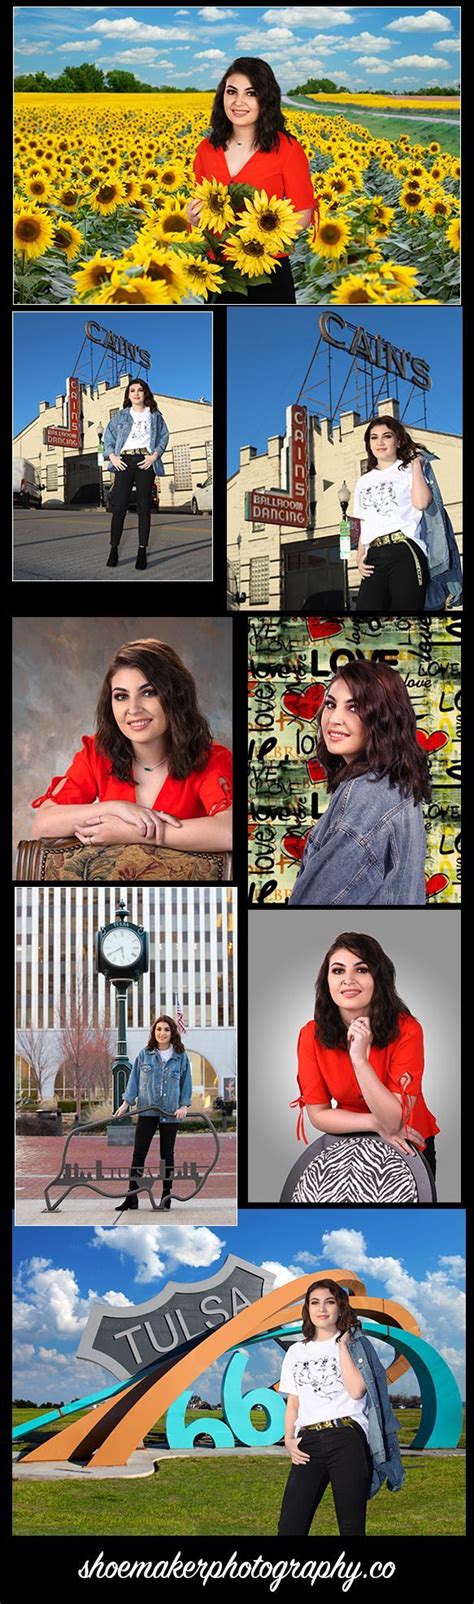 Tulsa High School Senior Picture Photographe For Yearbook And